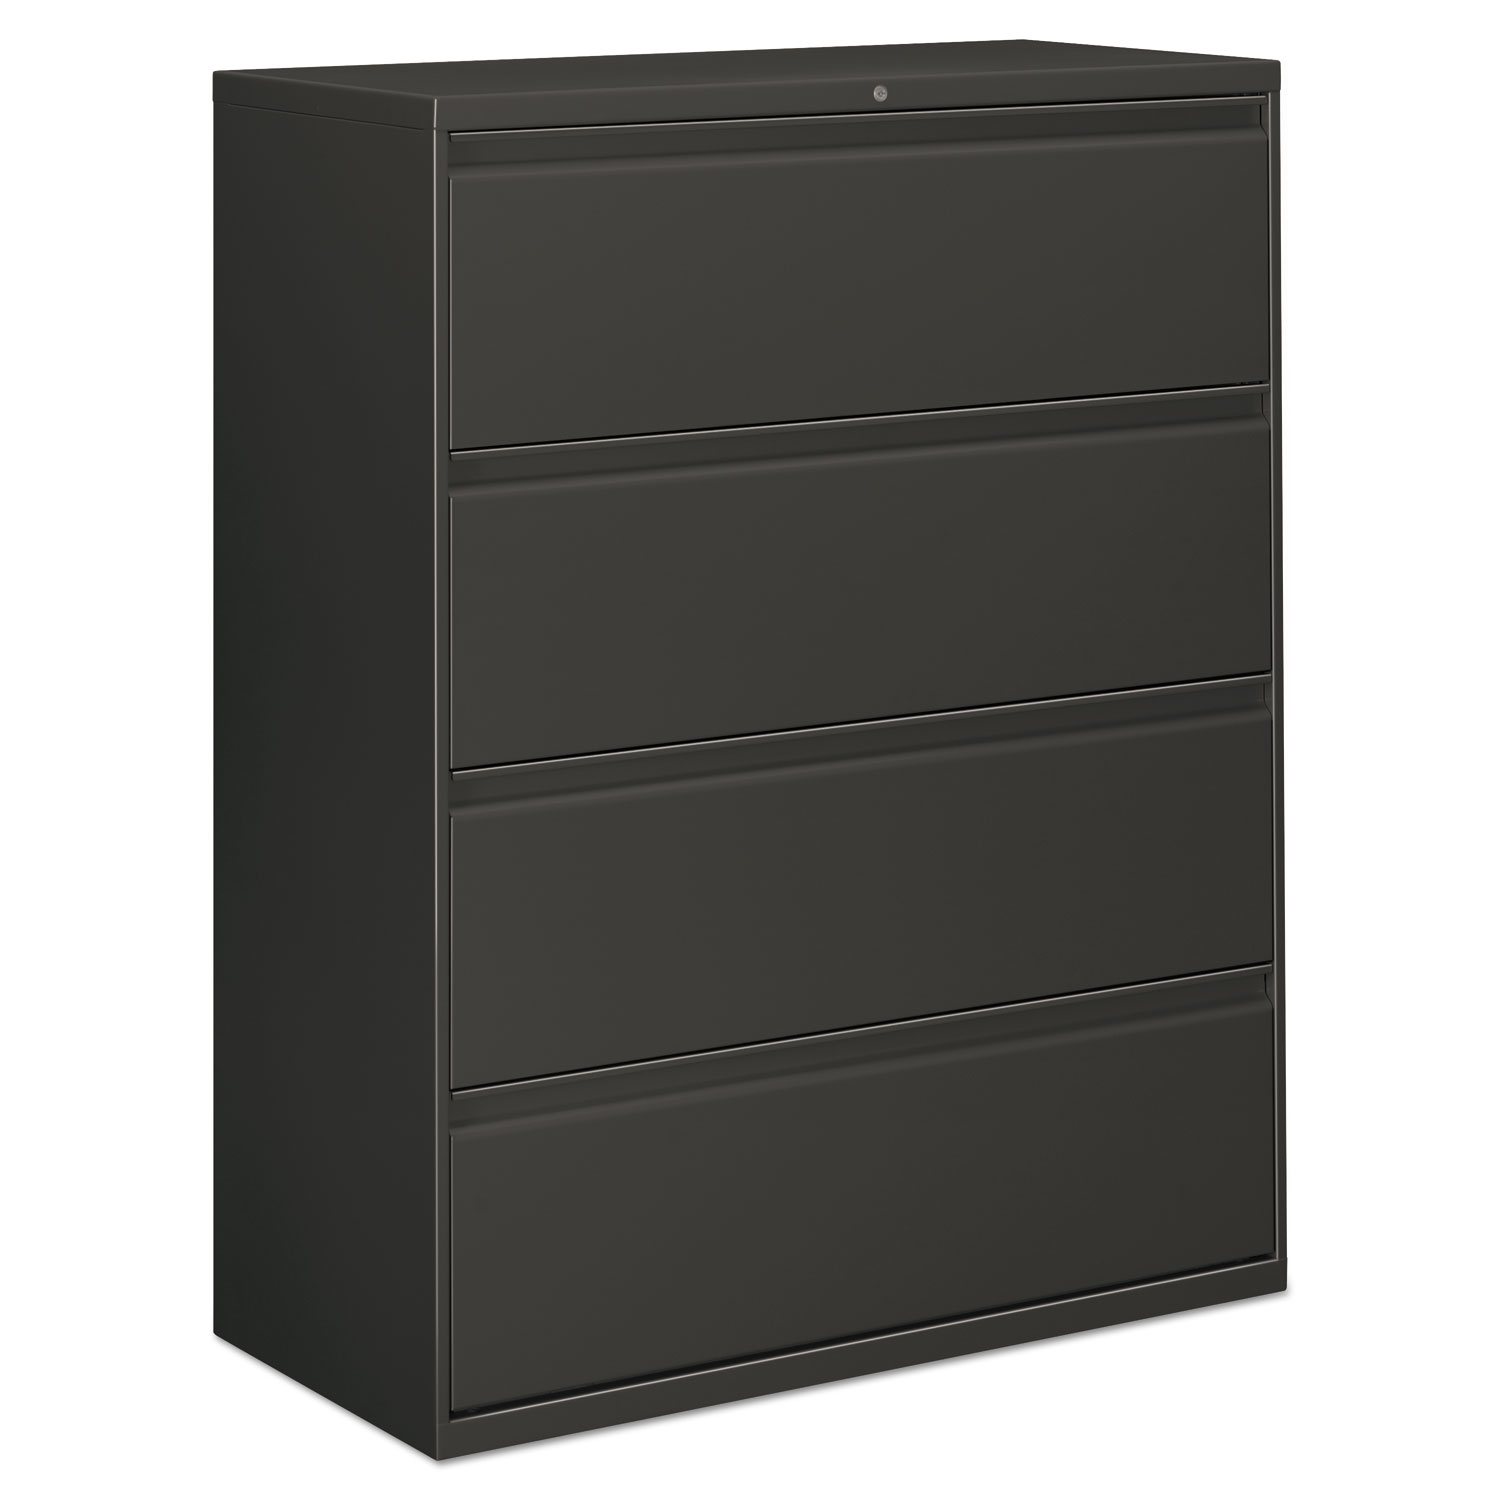 Four-Drawer Lateral File Cabinet, 42w x 18d x 52 1/2h, Charcoal